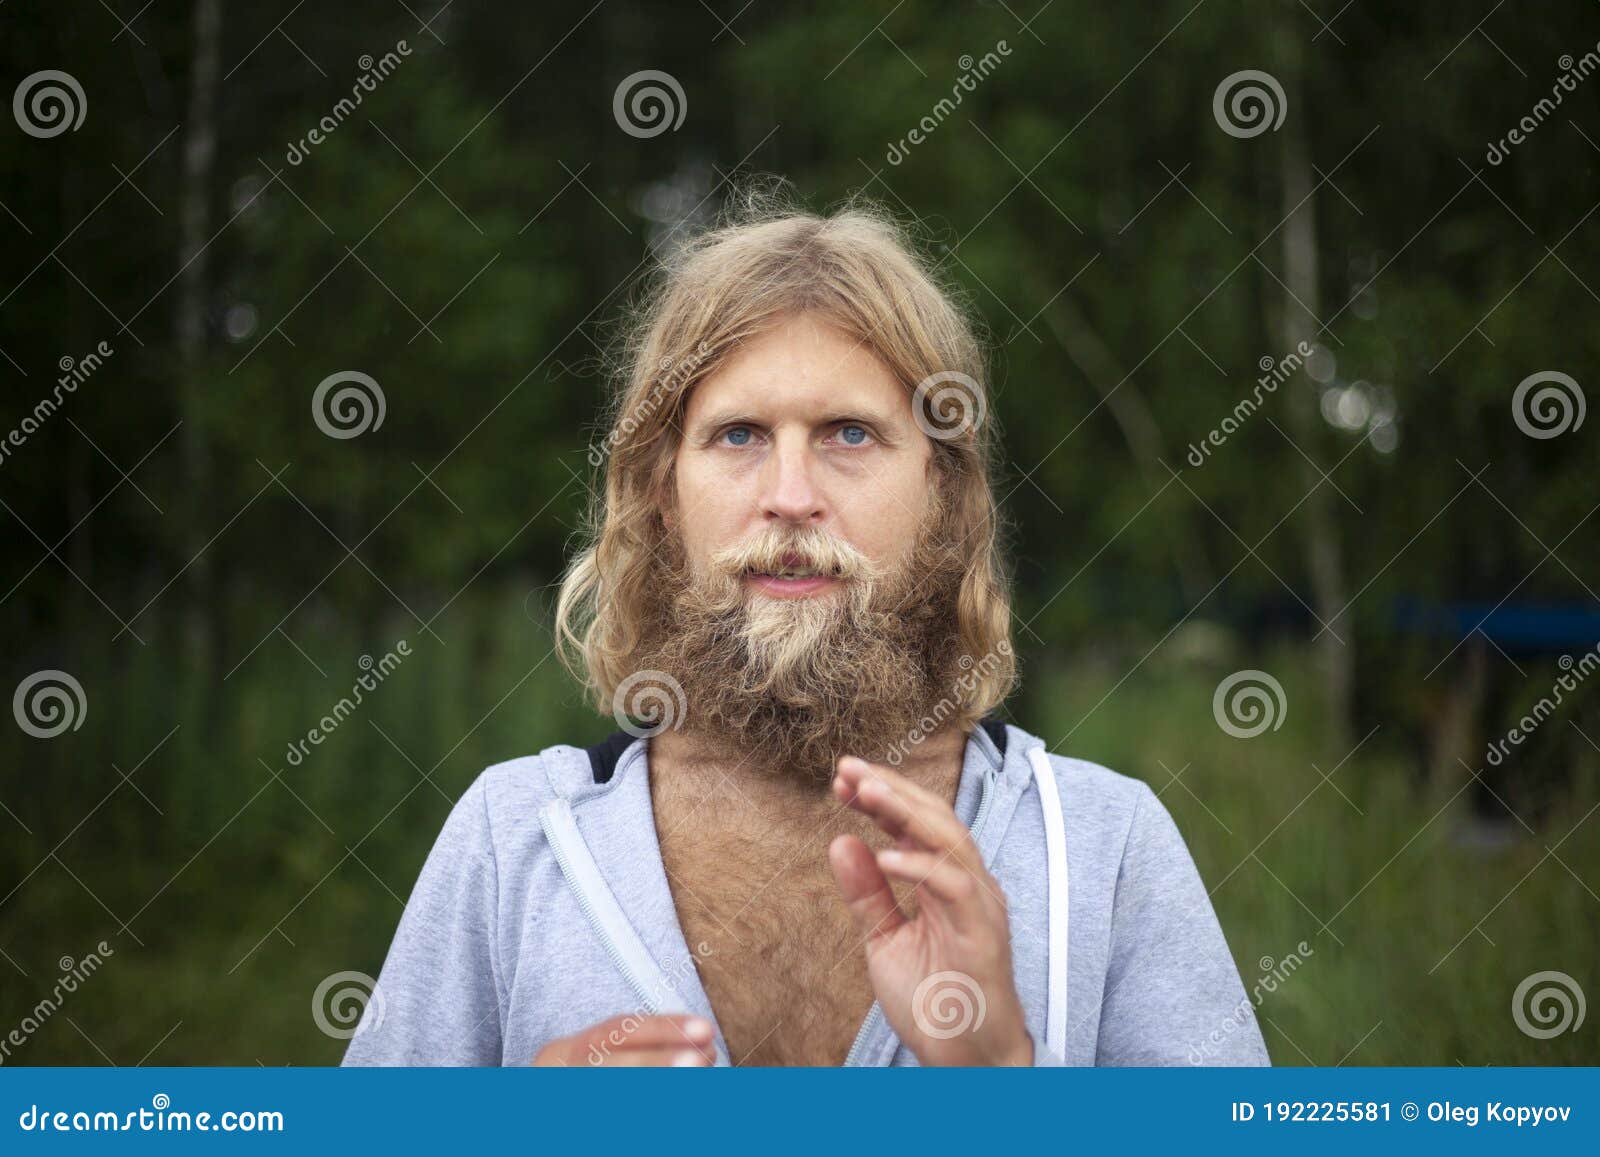 A Guy with a Big White Beard. a Man with Long Hair. a Traveler Seeking  Spiritual Insight Stock Image - Image of healthy, traveler: 192225581